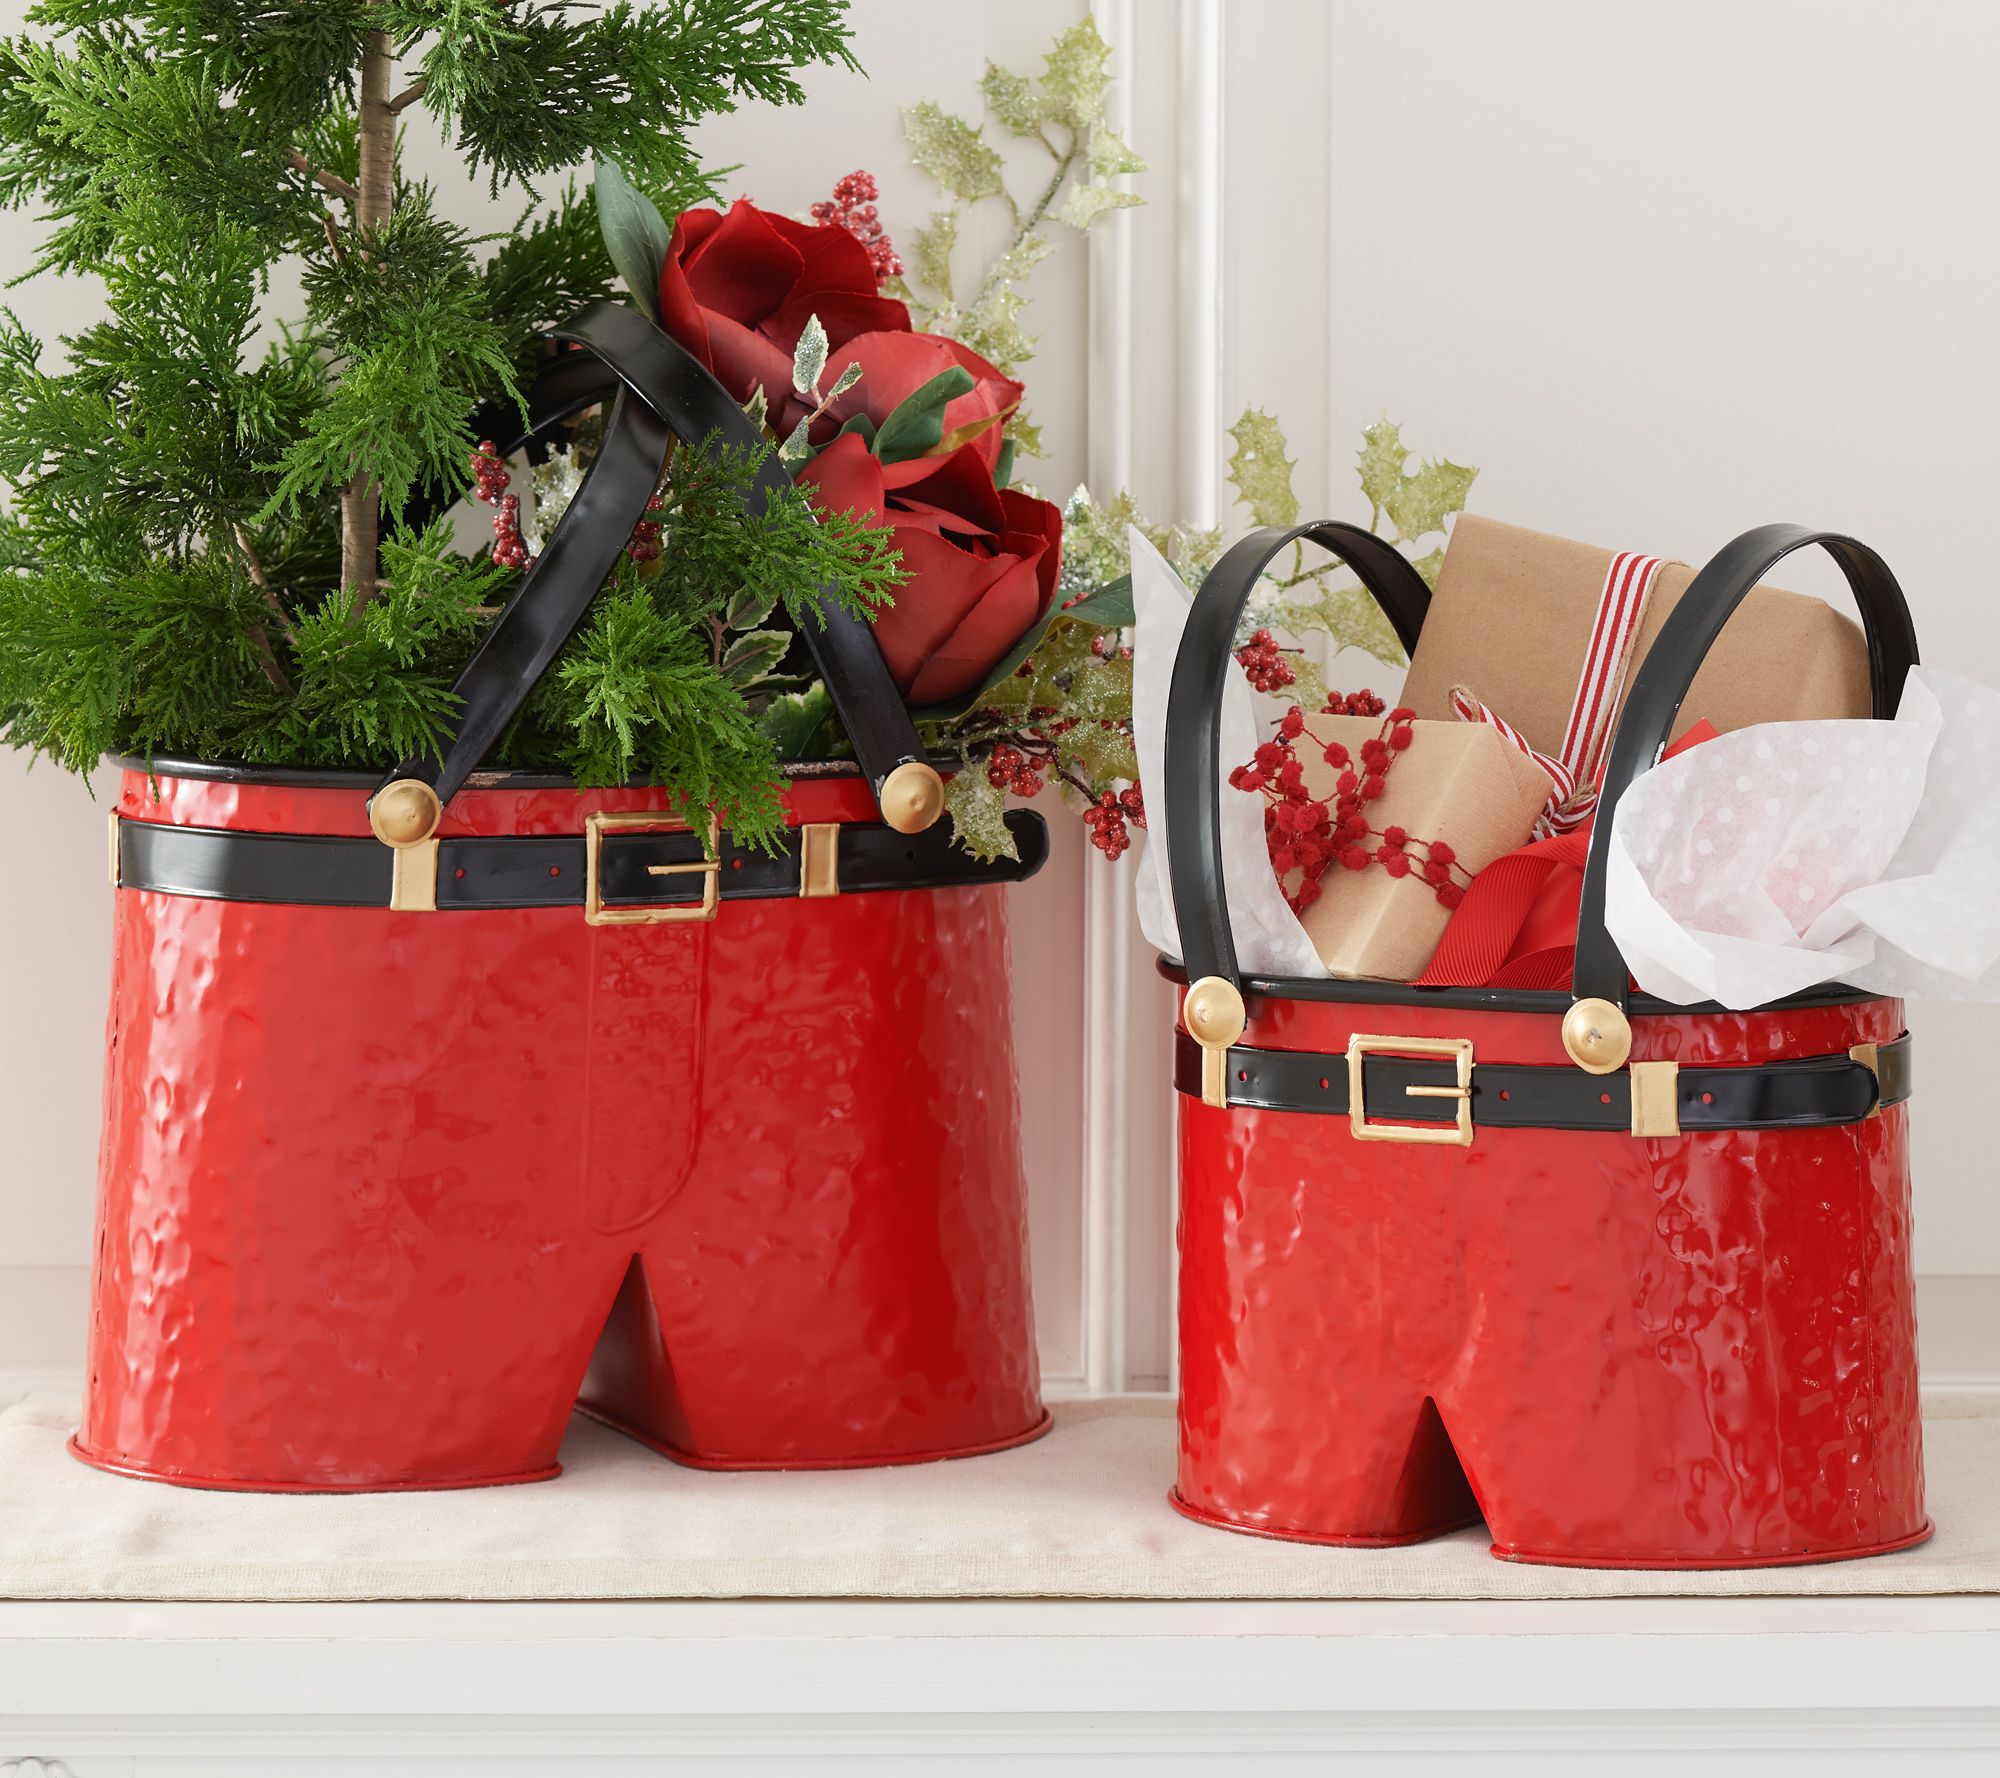 Set of 2 Metal Santa's Suit Buckets with Handles by Valerie 